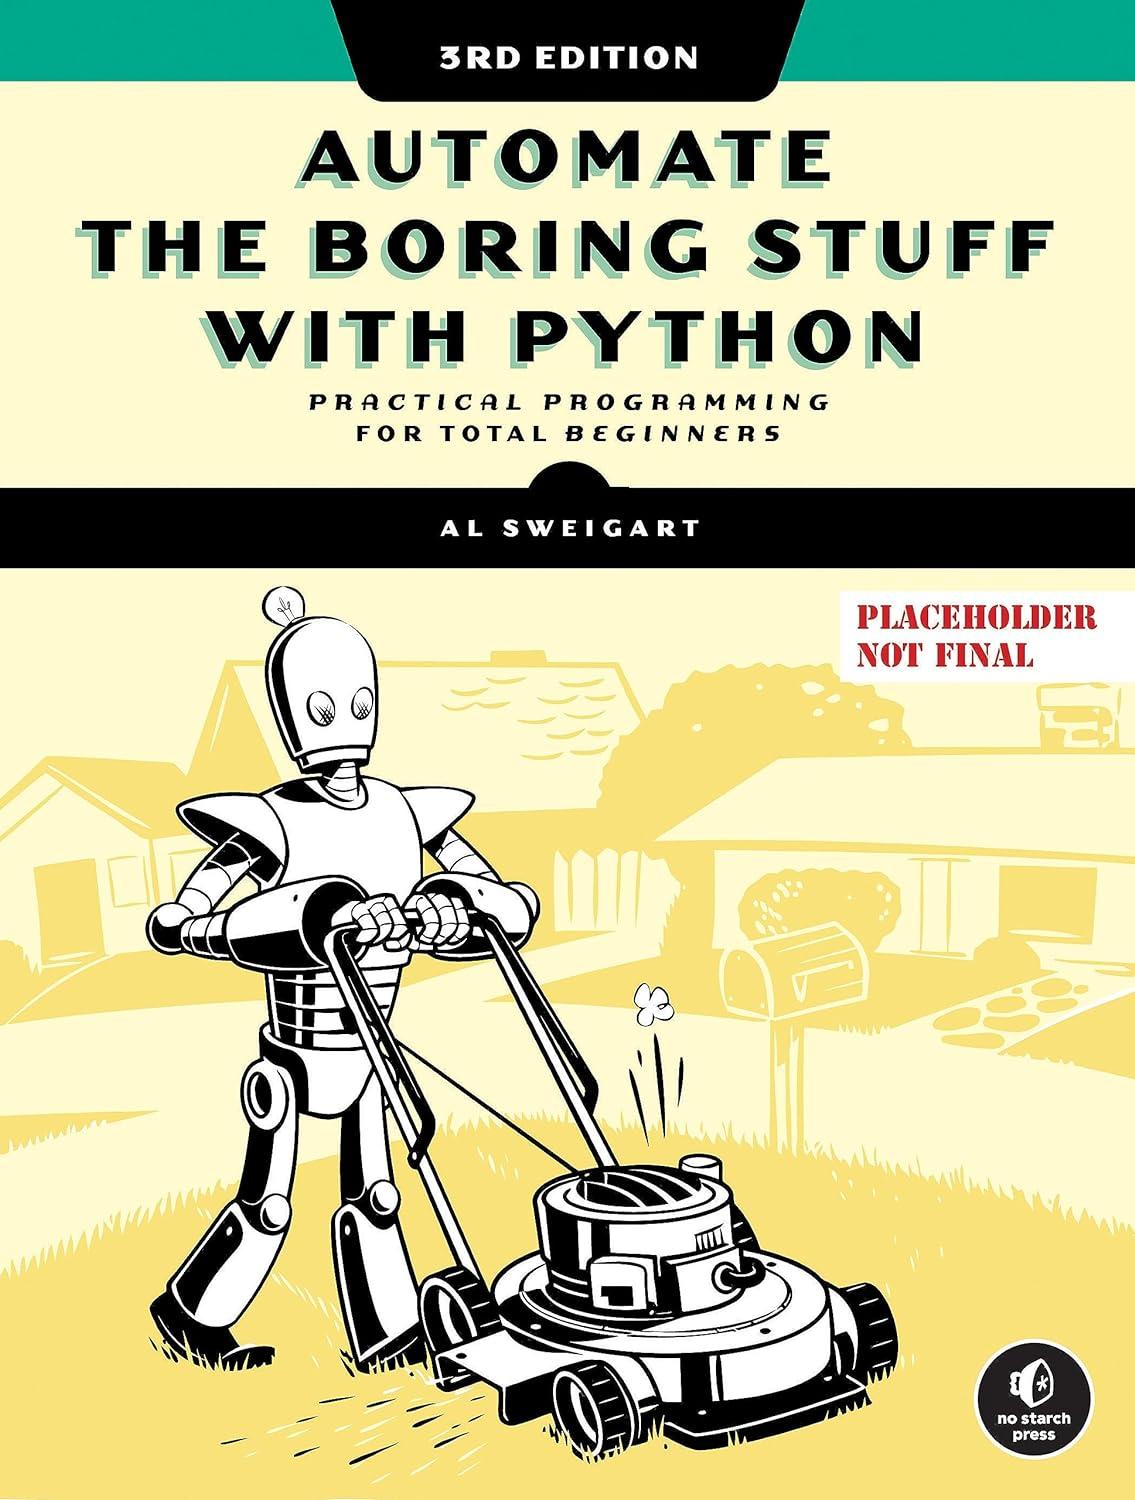 automate the boring stuff with python 3rd edition al sweigart 1718503407, 978-1718503403